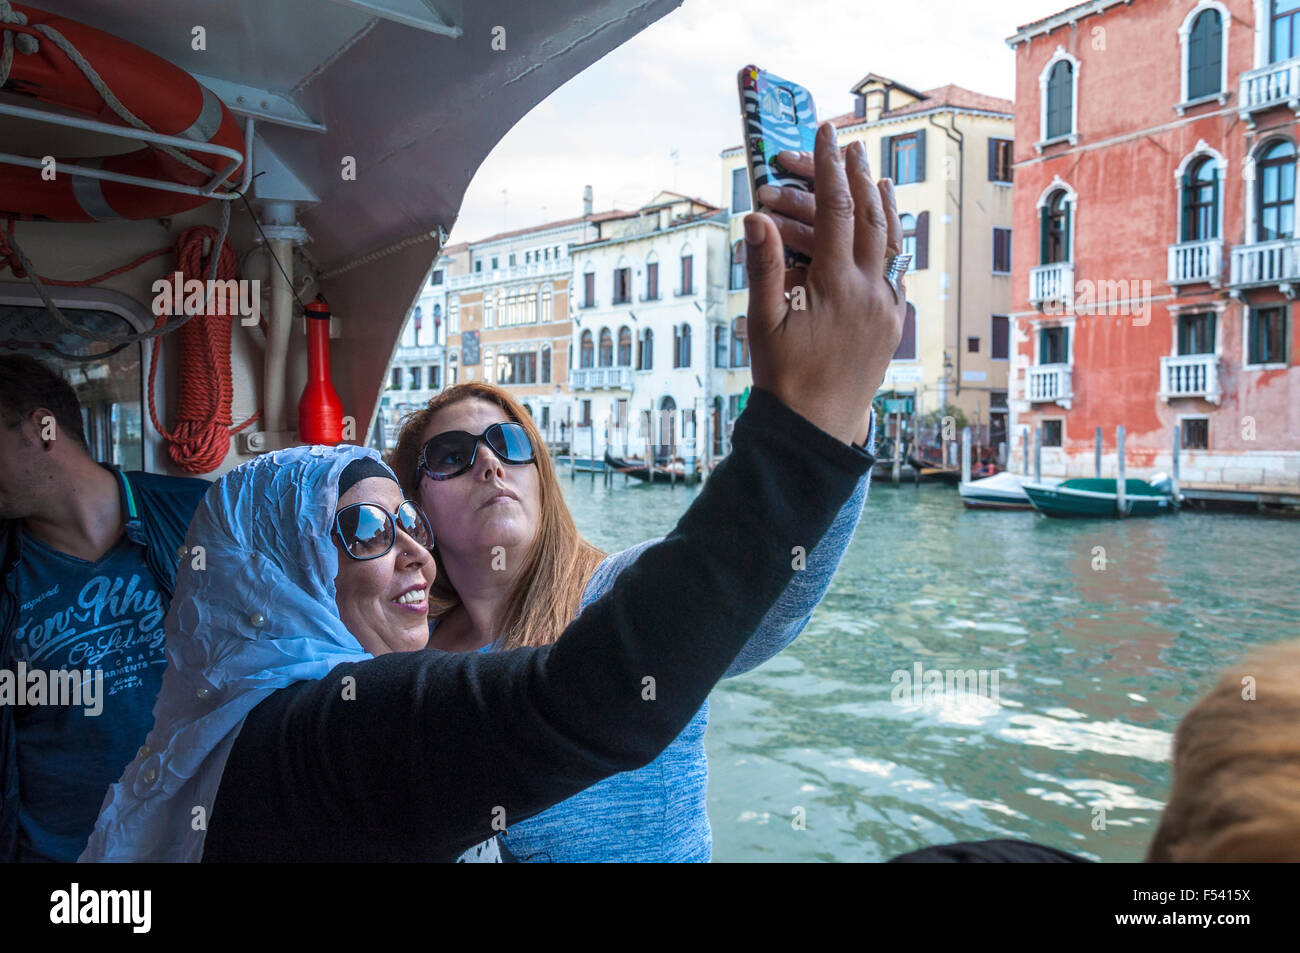 Two women take a selfie phone camera photo on a vaporetto on the grand Canal in Venice, Italy Stock Photo